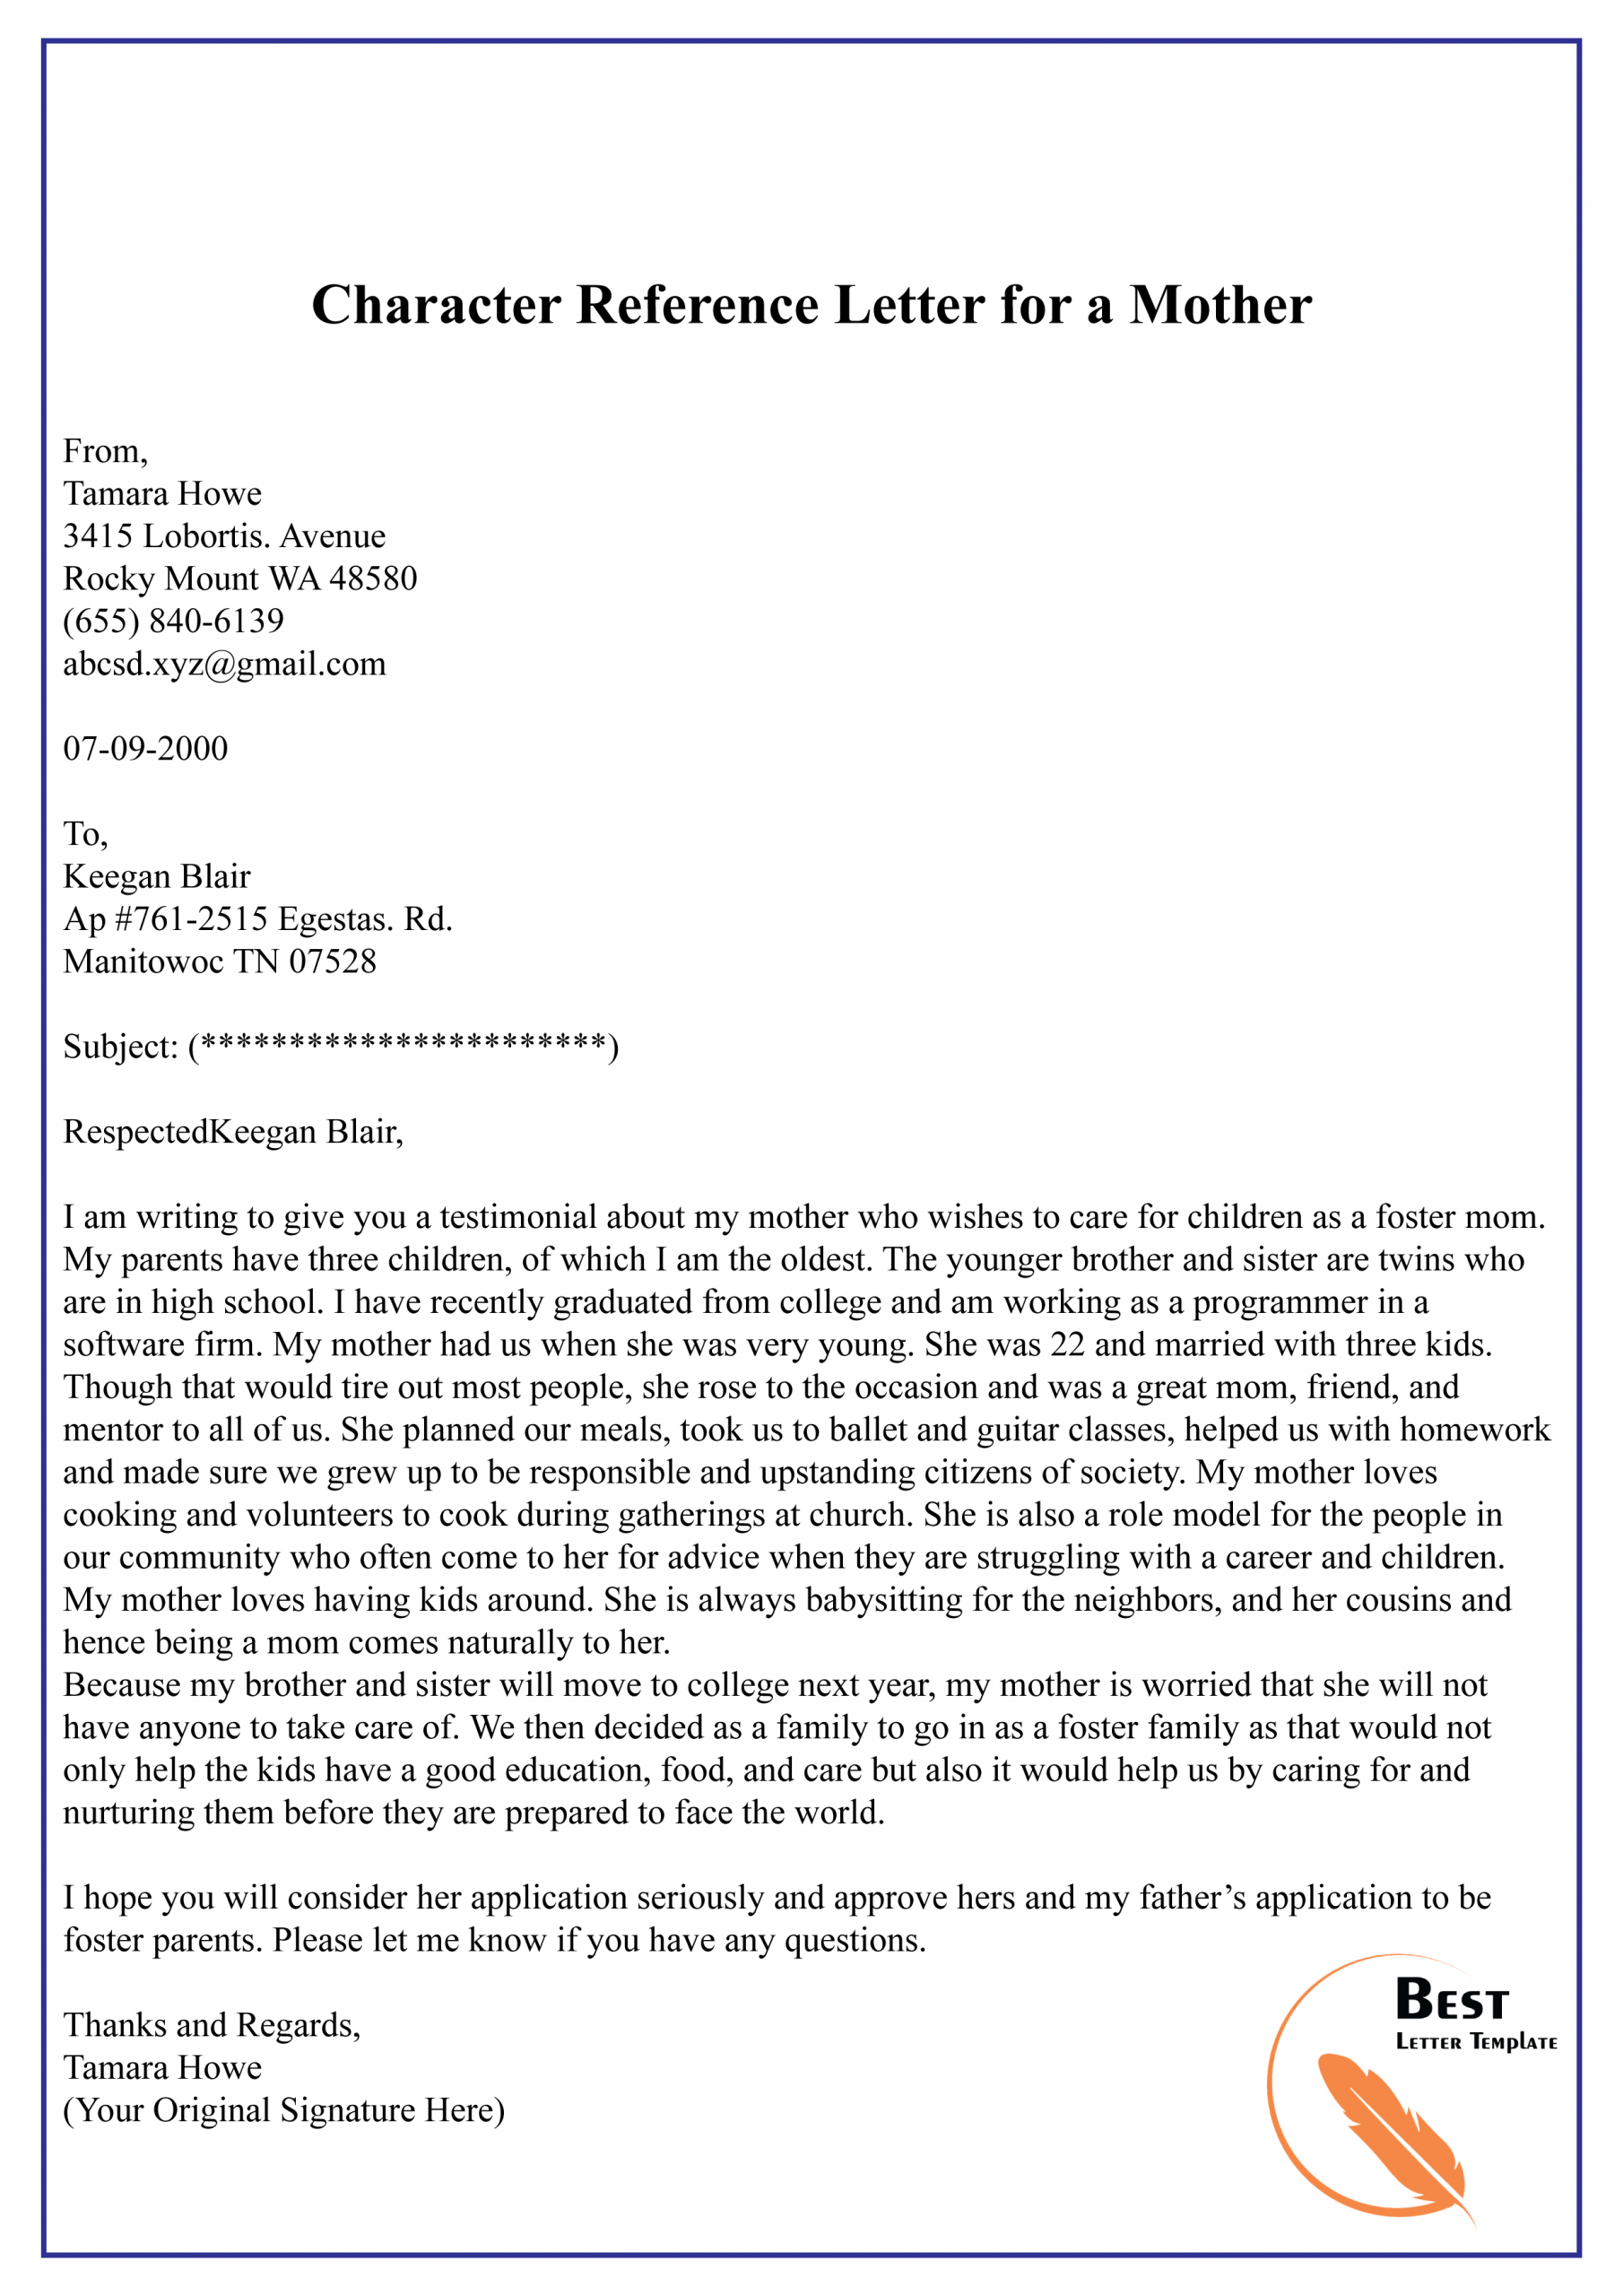 Character Reference Letter For A Mother 01 Best Letter with regard to measurements 2480 X 3508